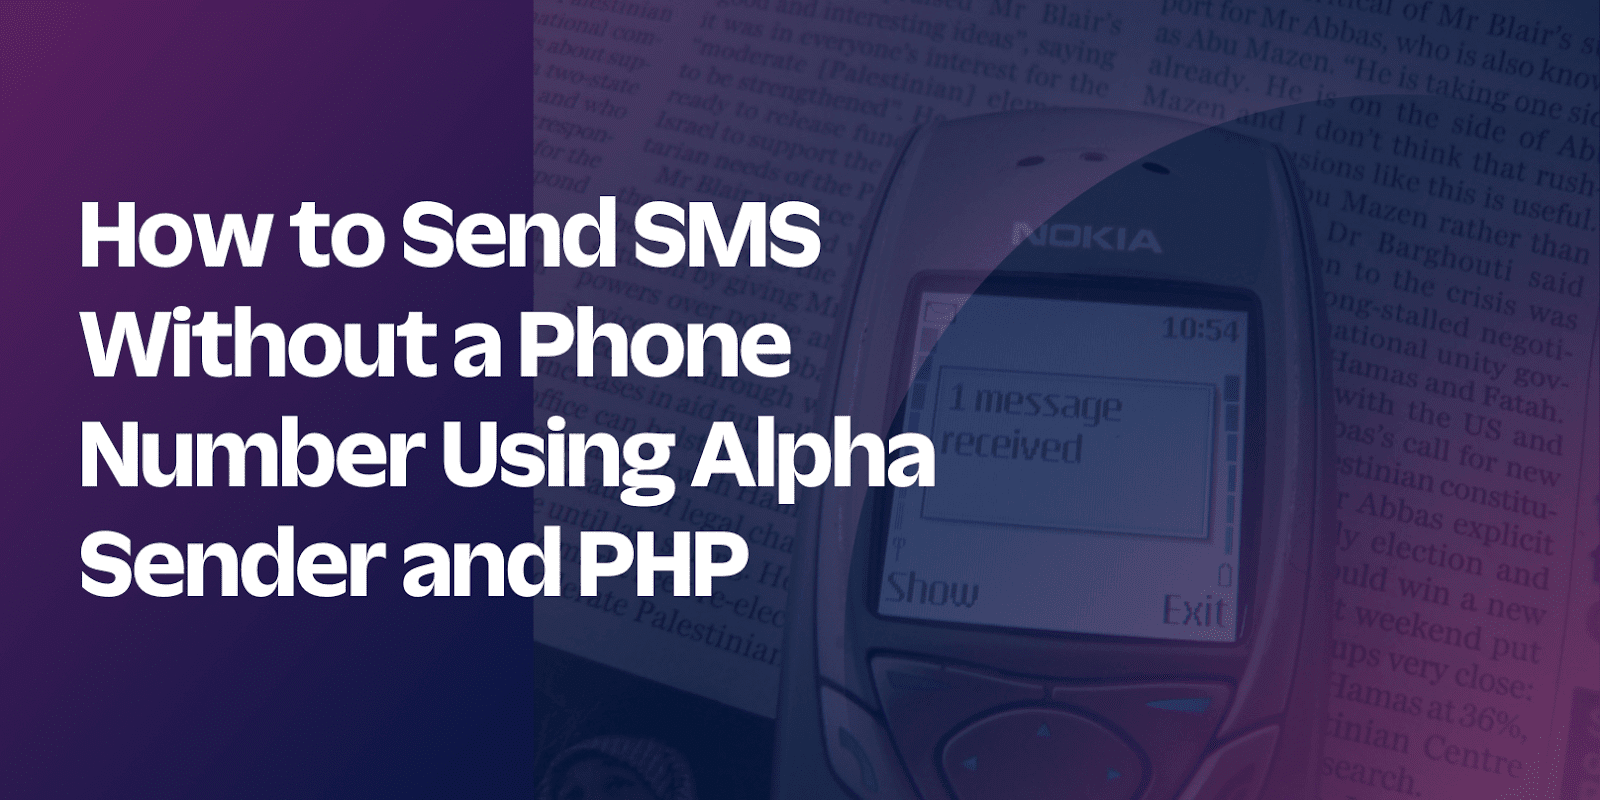 How to send SMS Without a Phone Number using Alpha Sender and PHP